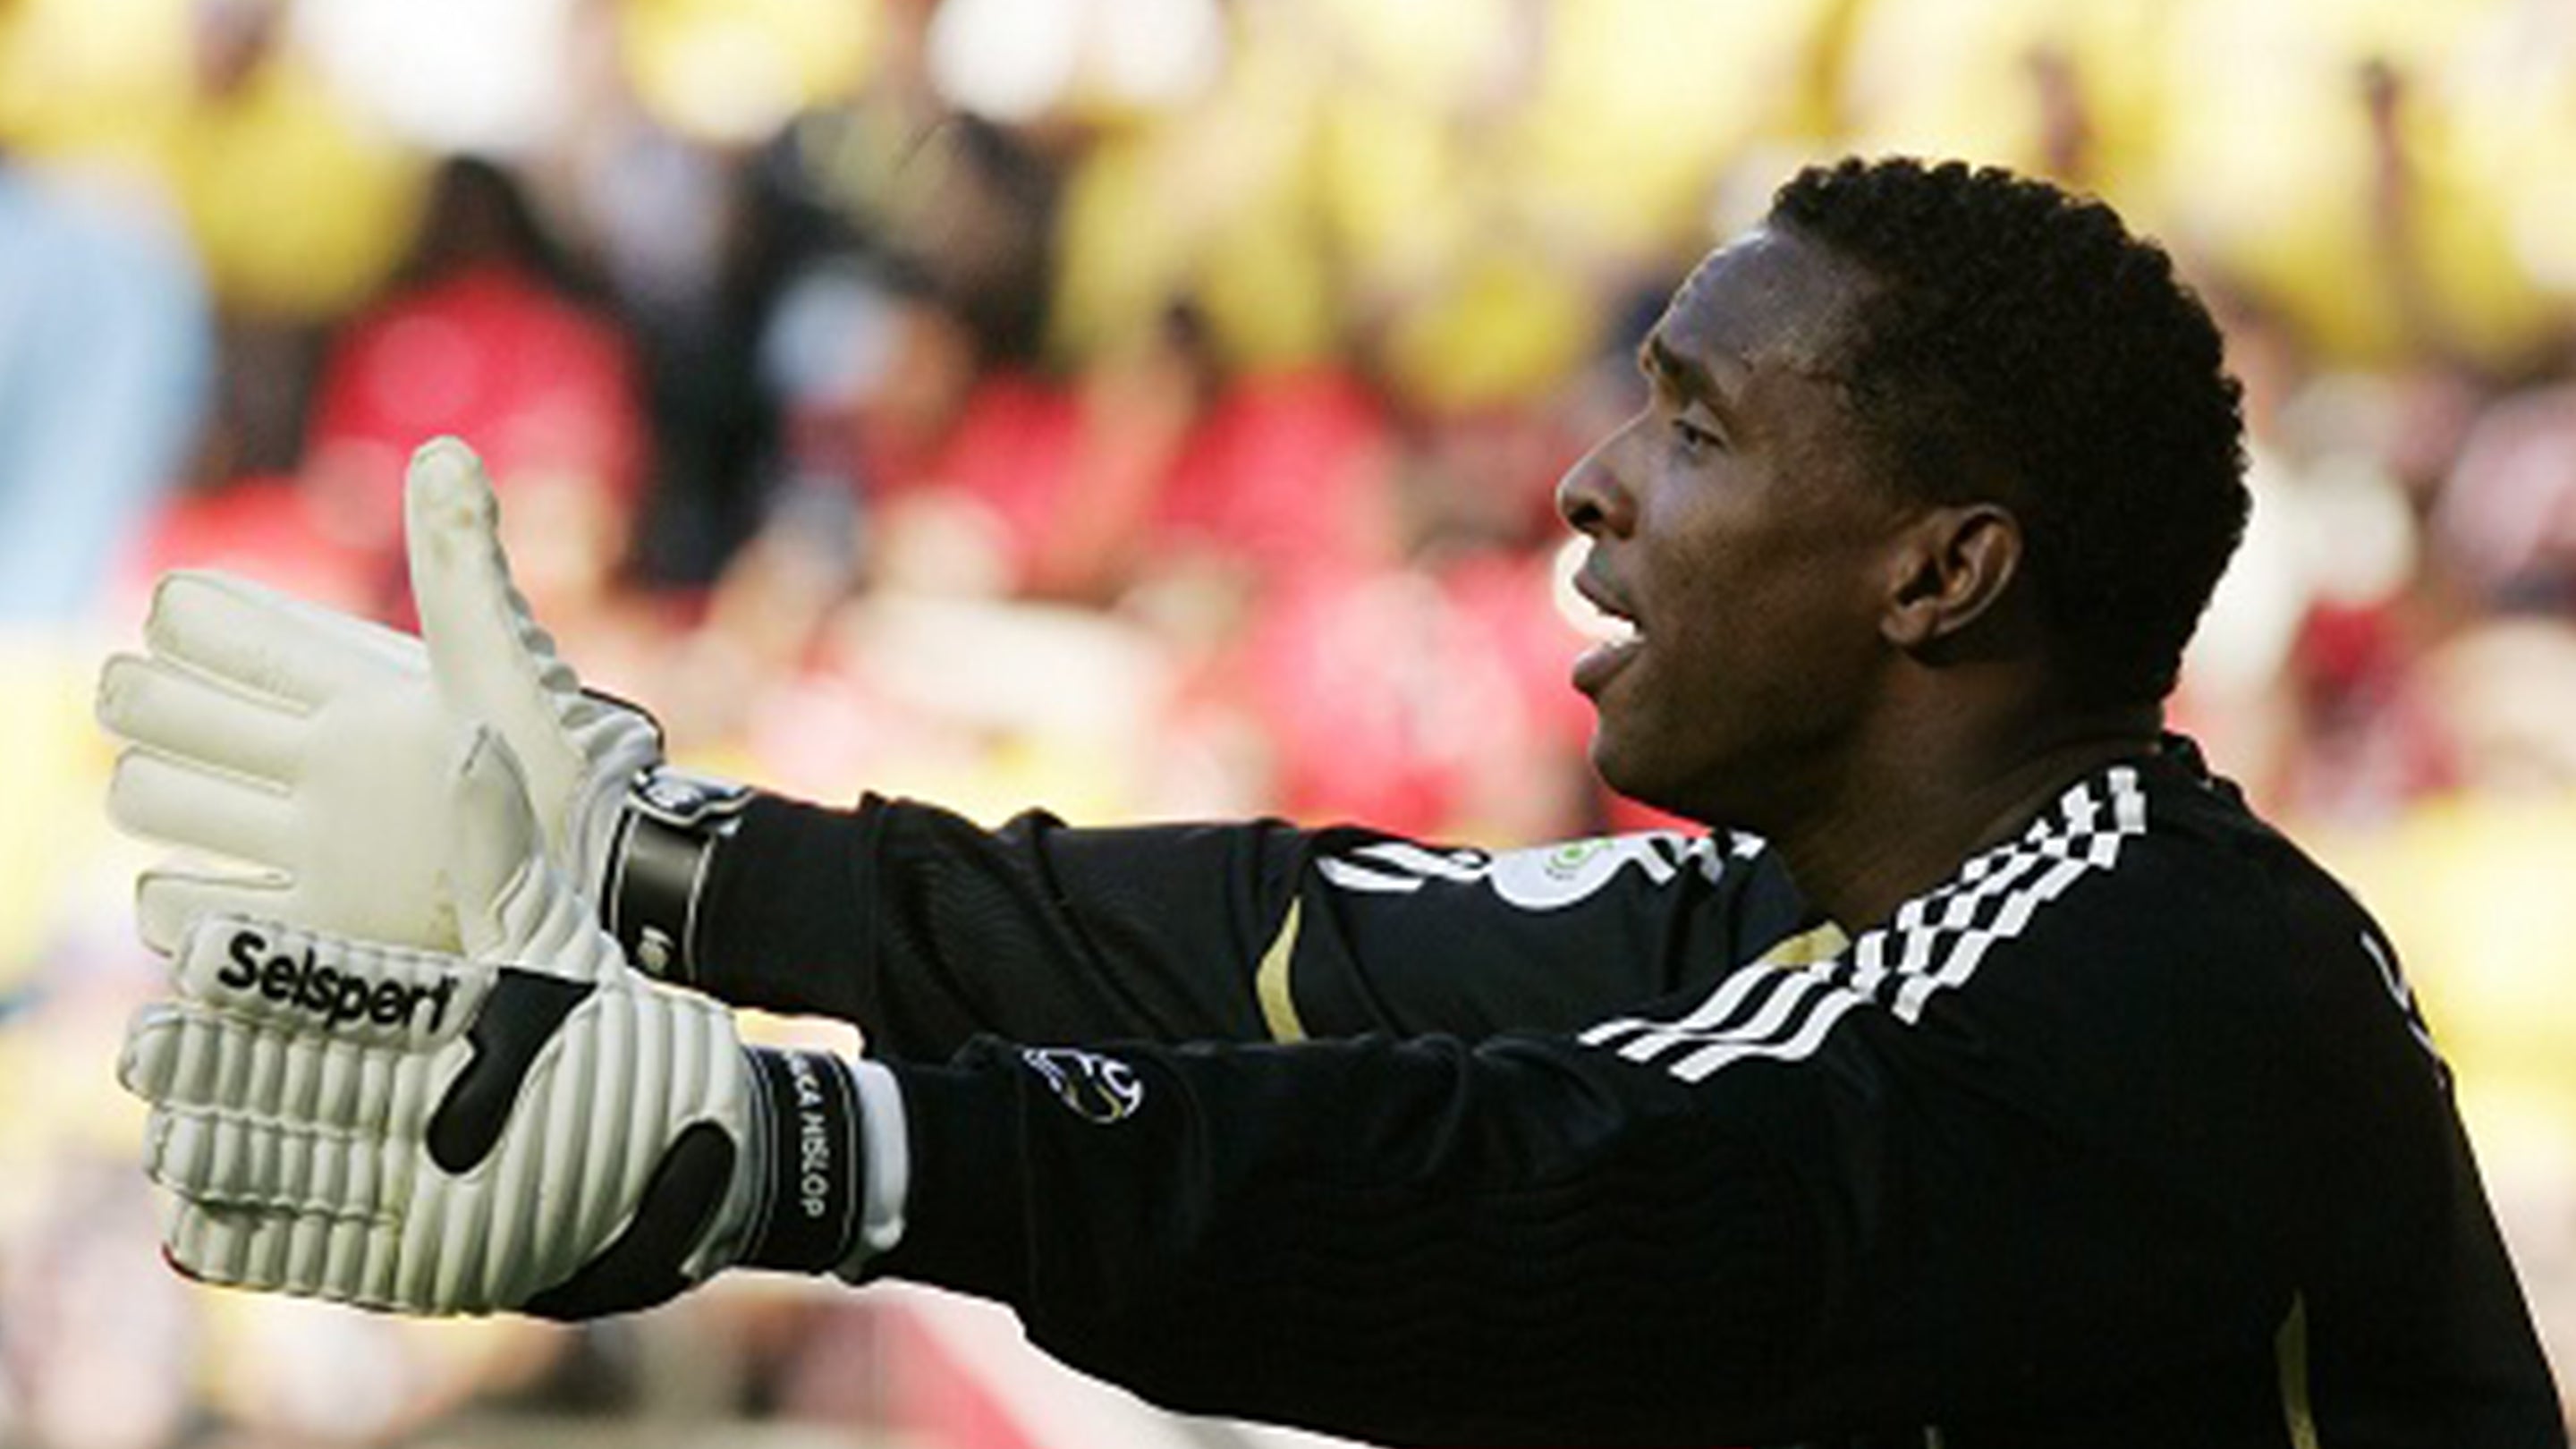 Shaka Hislop International goalkeeper wearing a black goalkeeper shirt with his arms outstretched in Seslport Eurowrap goalkeeper gloves 